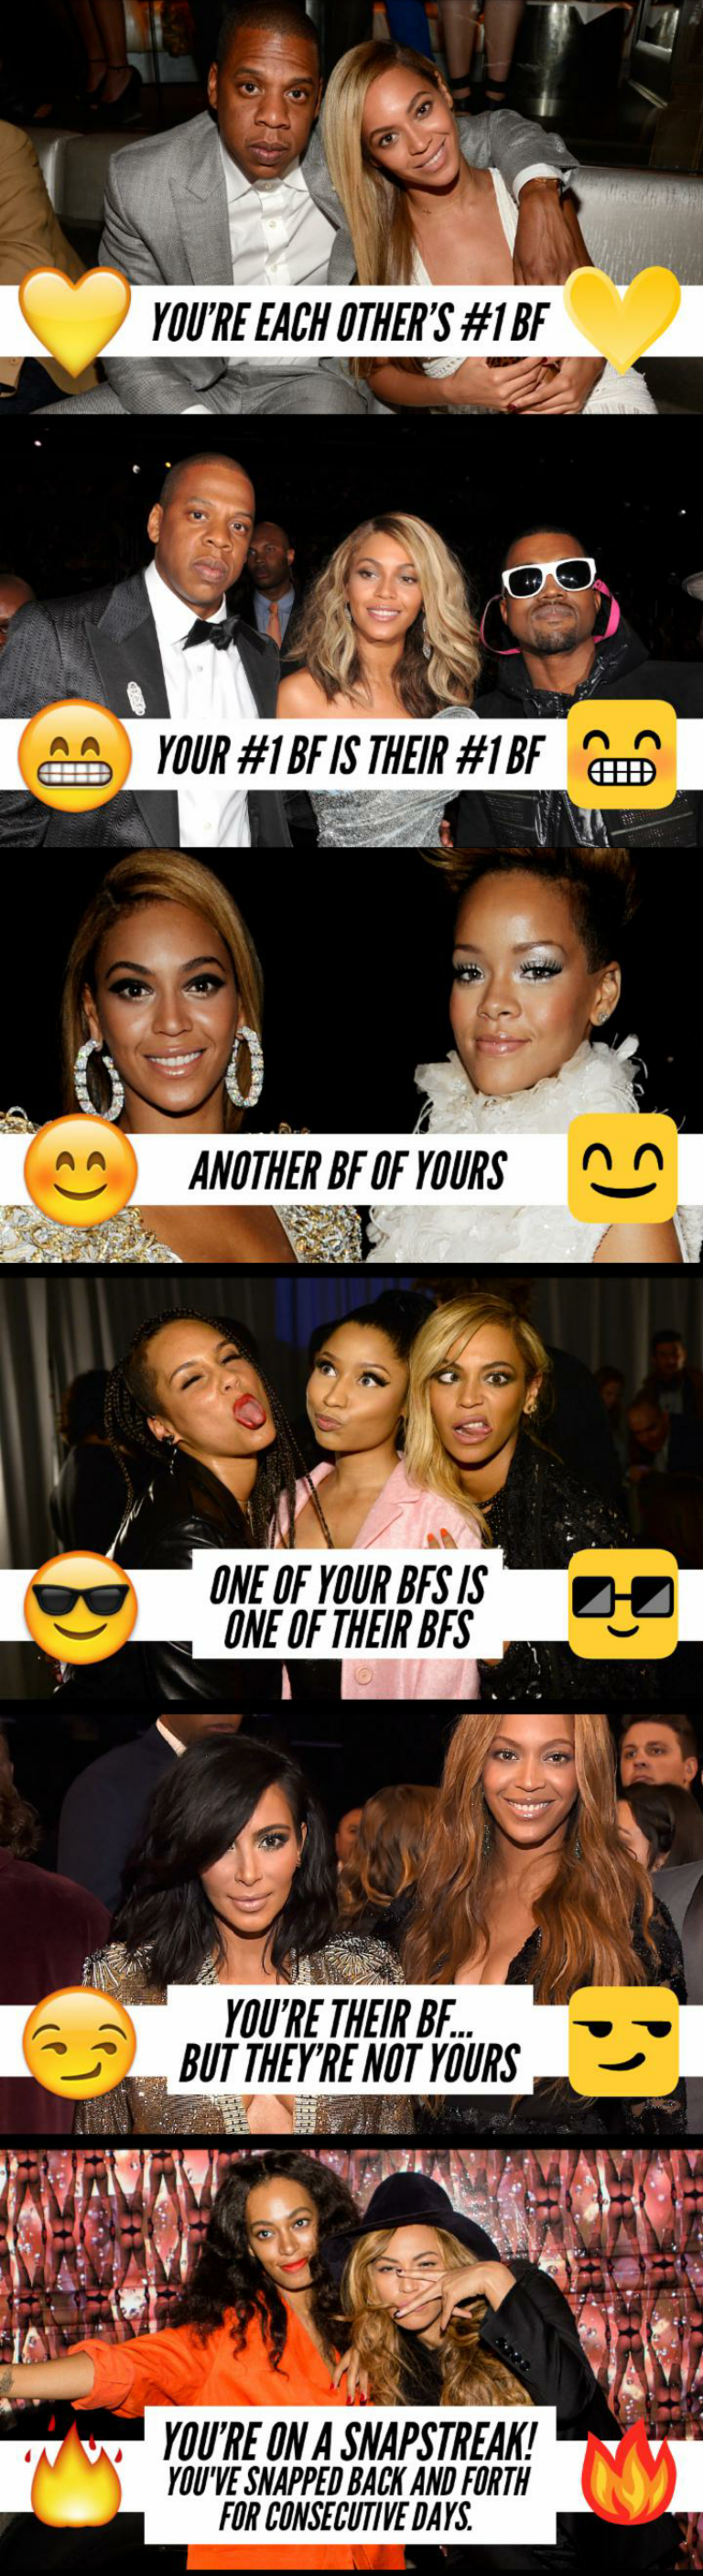 Snapchat Best Friends Are Back...As Emojis | Huffpost Impact